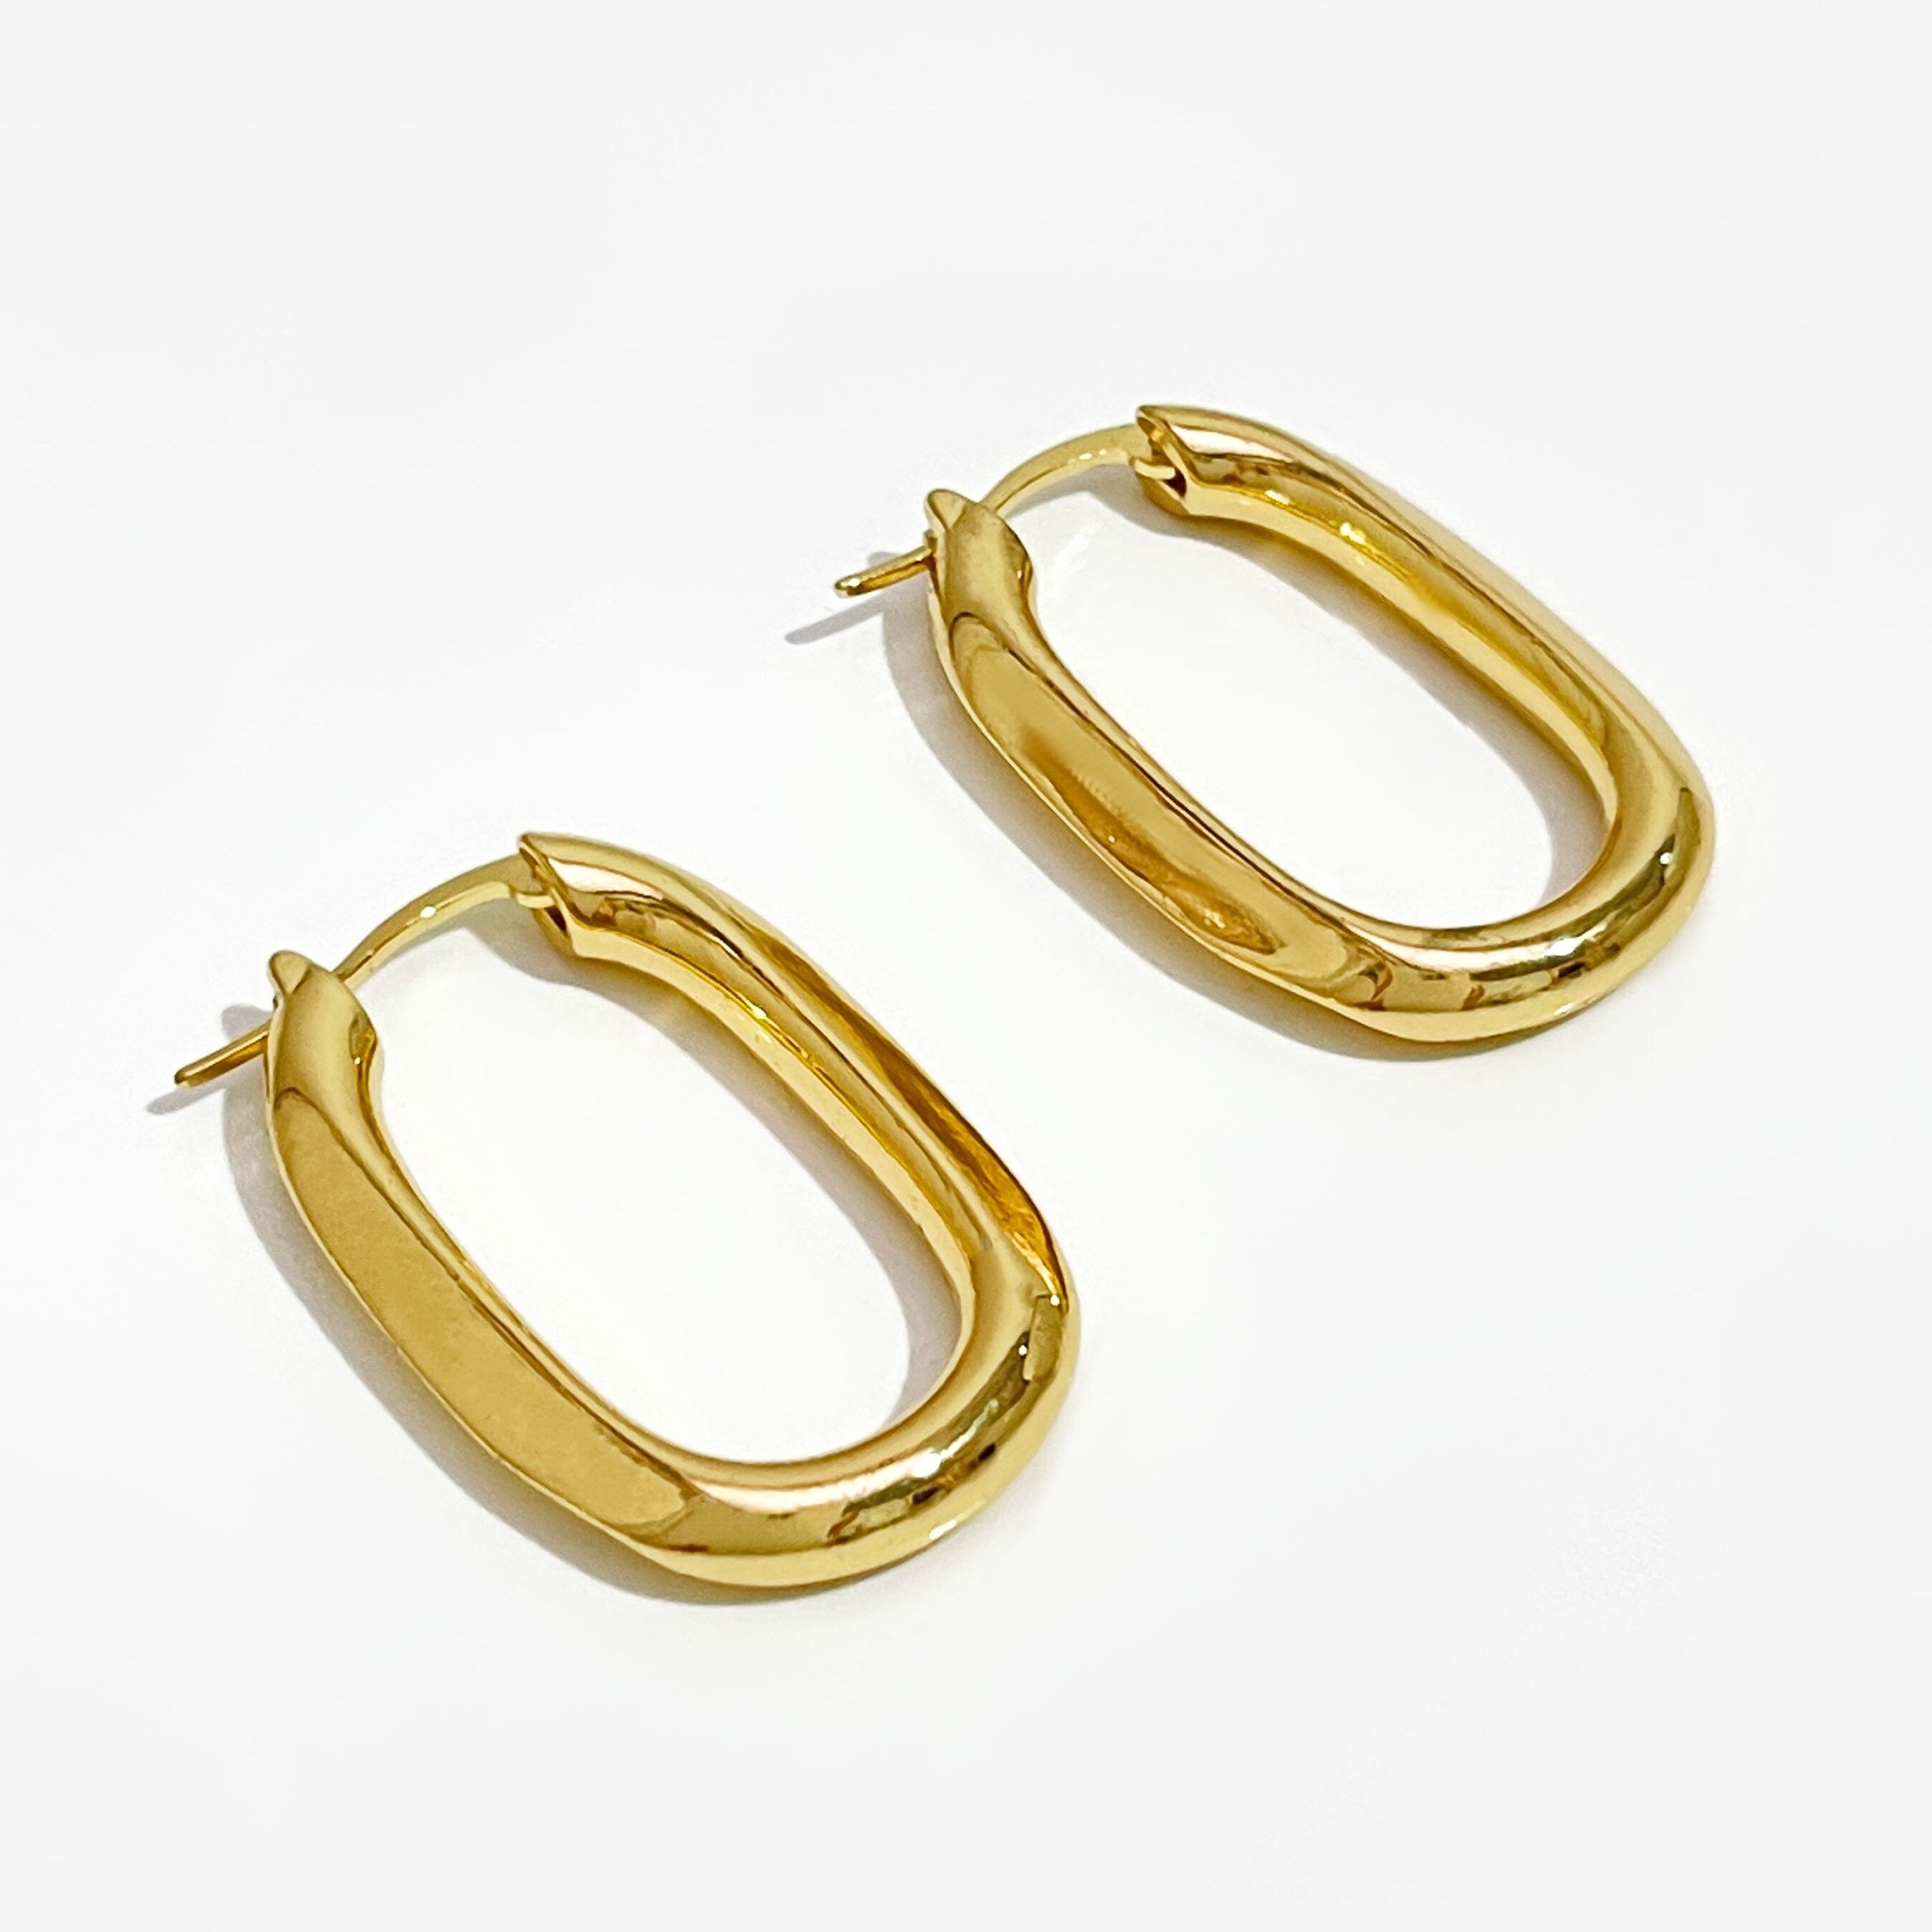 14KT Rose Gold Hoop Earrings with a leafy lush